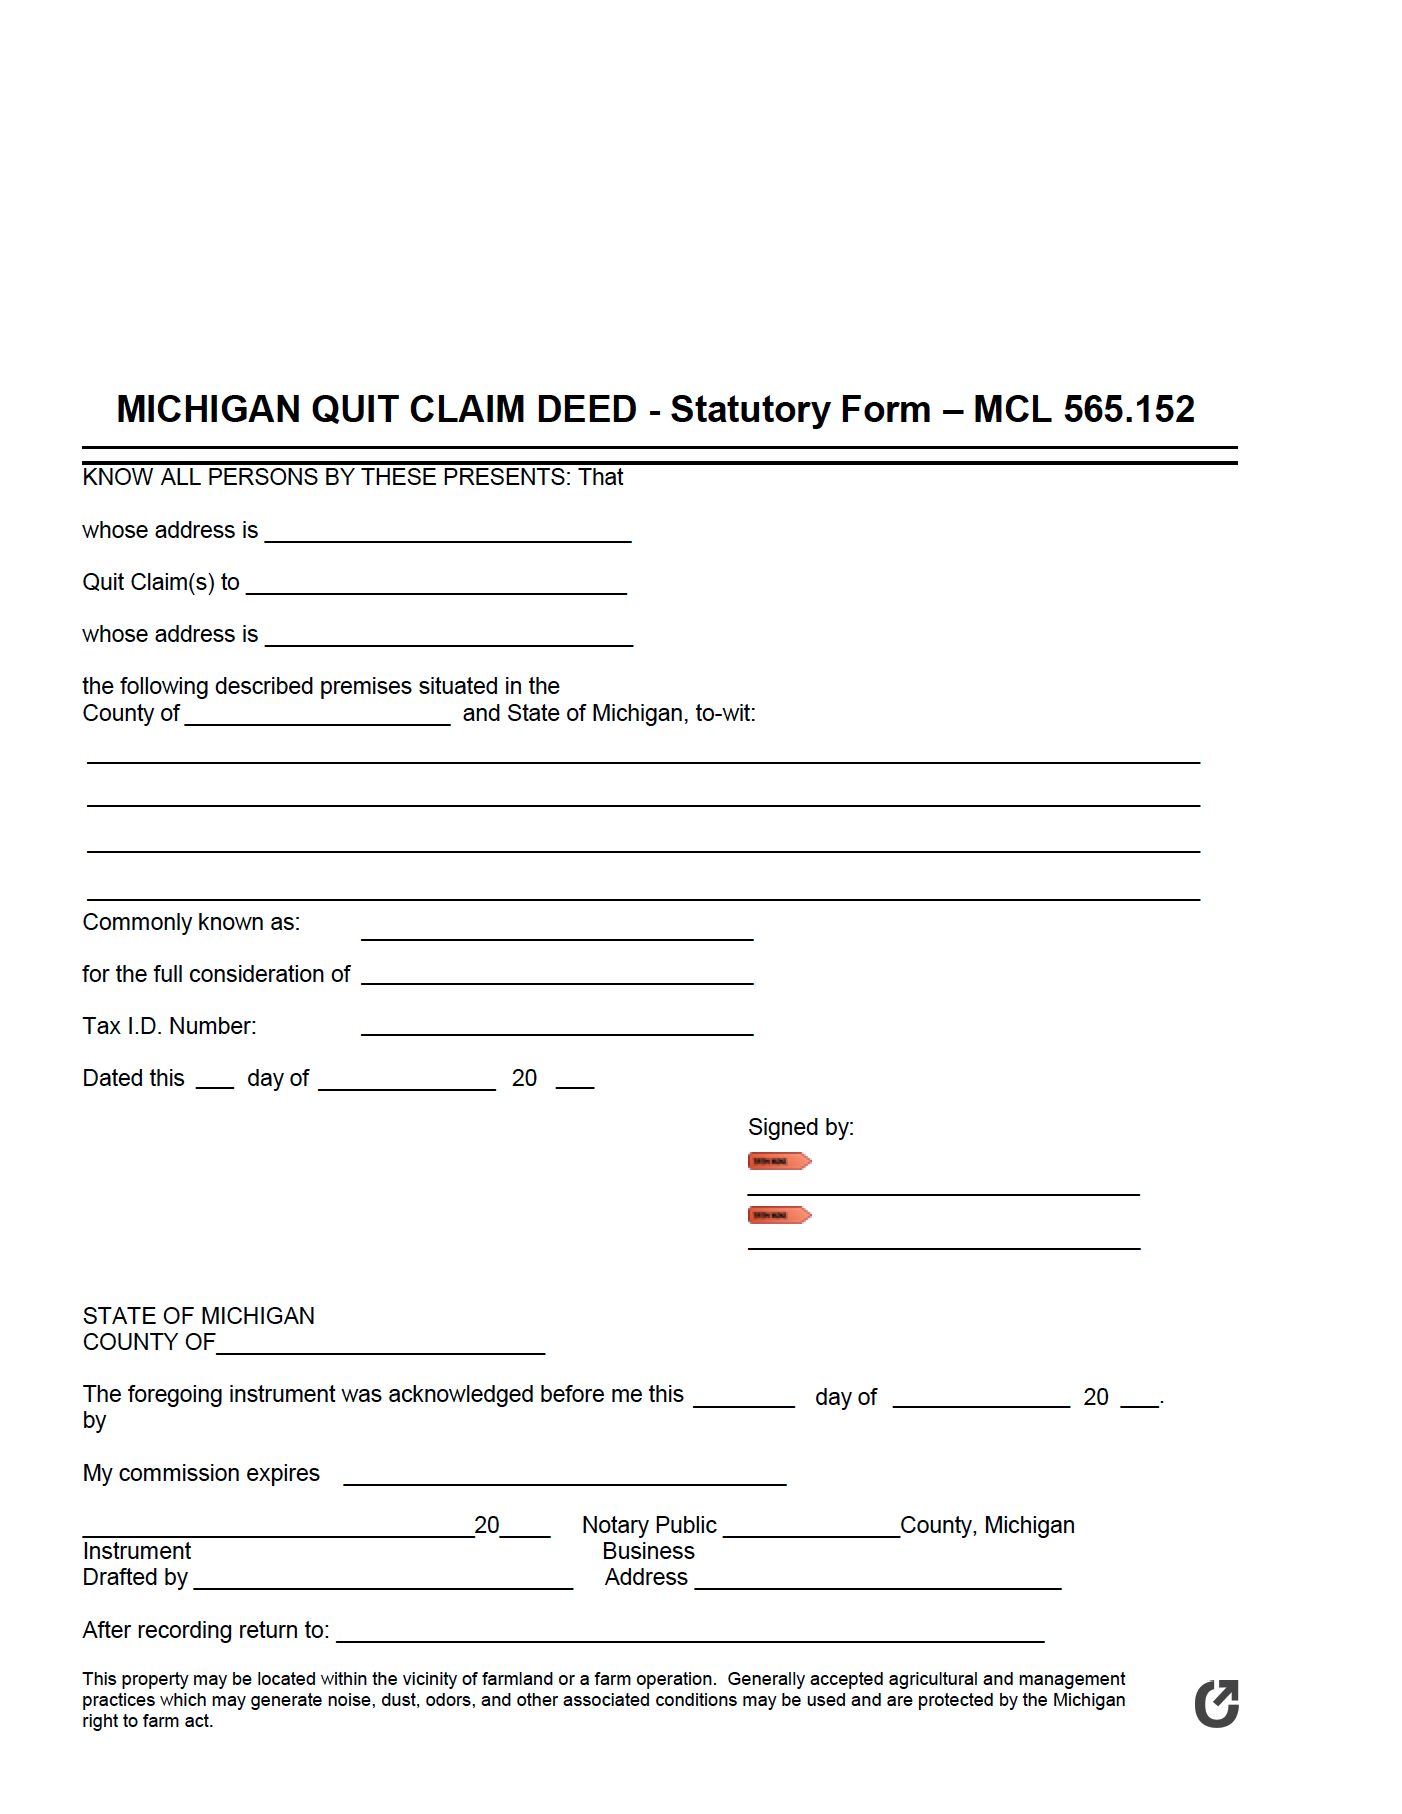 Where Can I Get A Quit Claim Deed Form Michigan